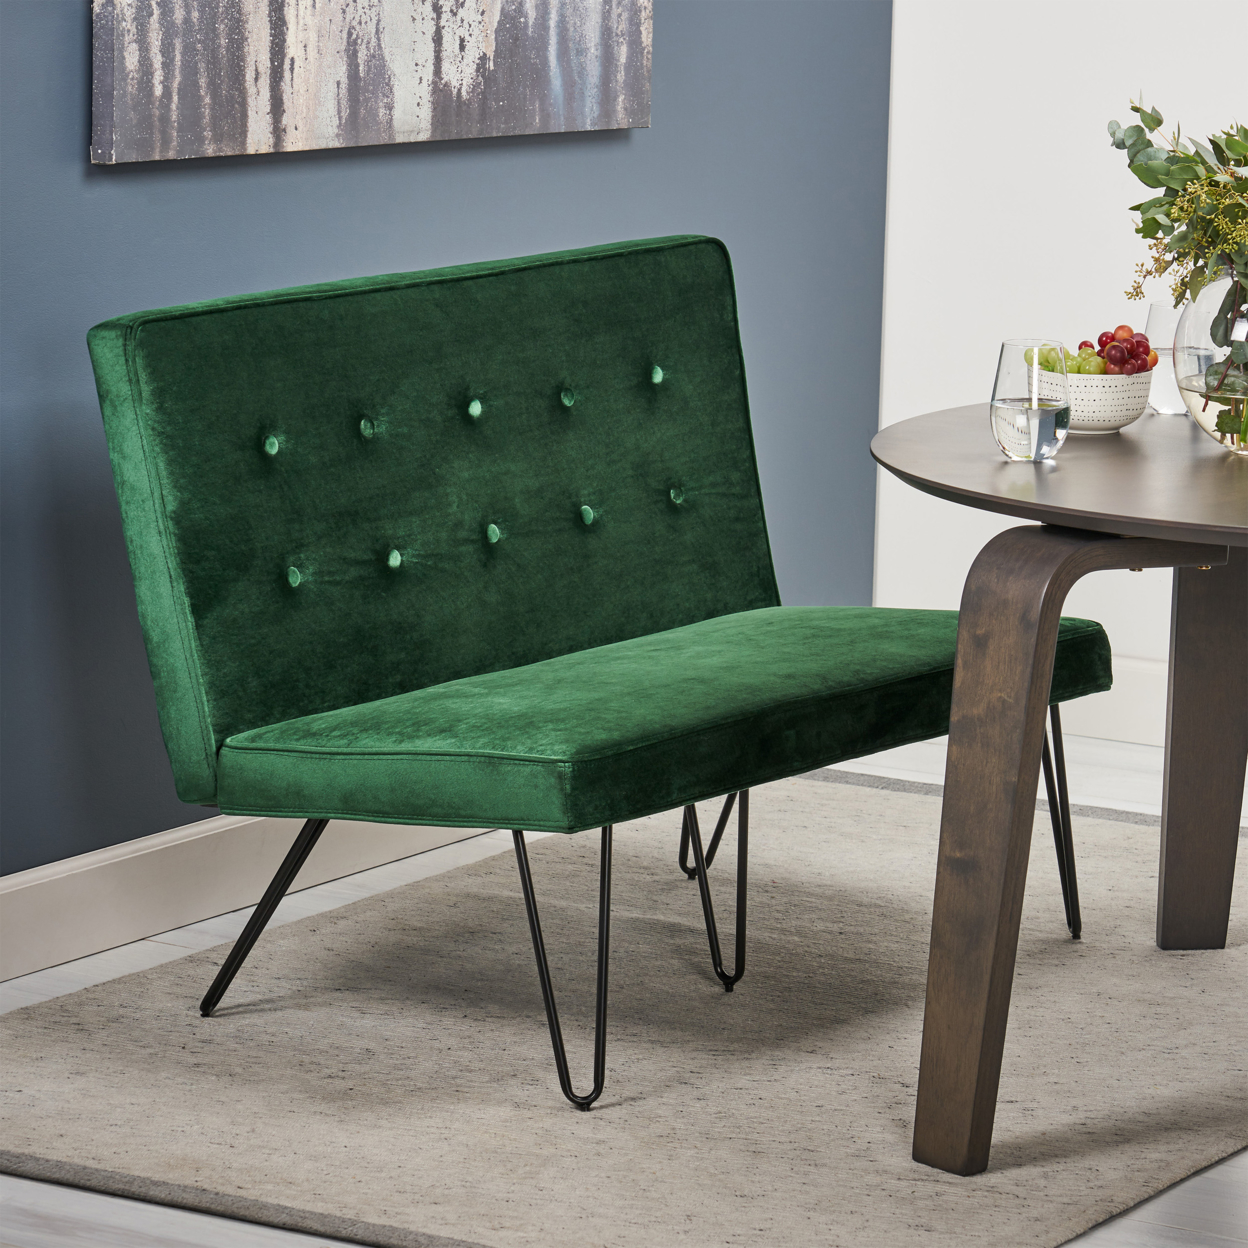 Beatrice Minimalist Dining Bench Settee With Tufted Velvet Cushion And Iron Legs - Cobalt And Black - Emerald, Black